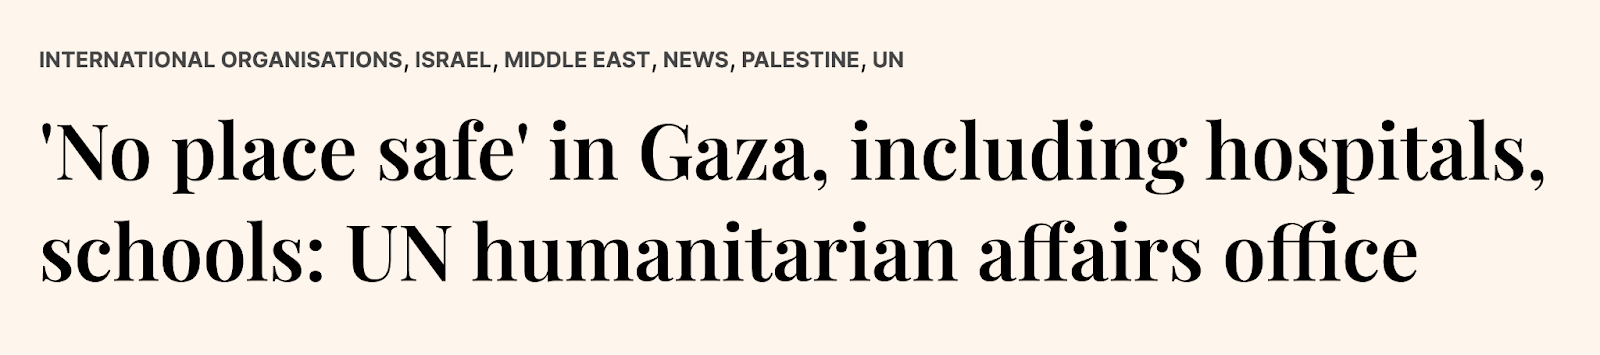 matéria do MEMO de título 'No place safe in Gaza, including hospitals, schools: UN humanitarian affairs office' e as tags 'International Organisations', 'Israel', 'Middle East', 'News', 'Palestine' e 'UN'